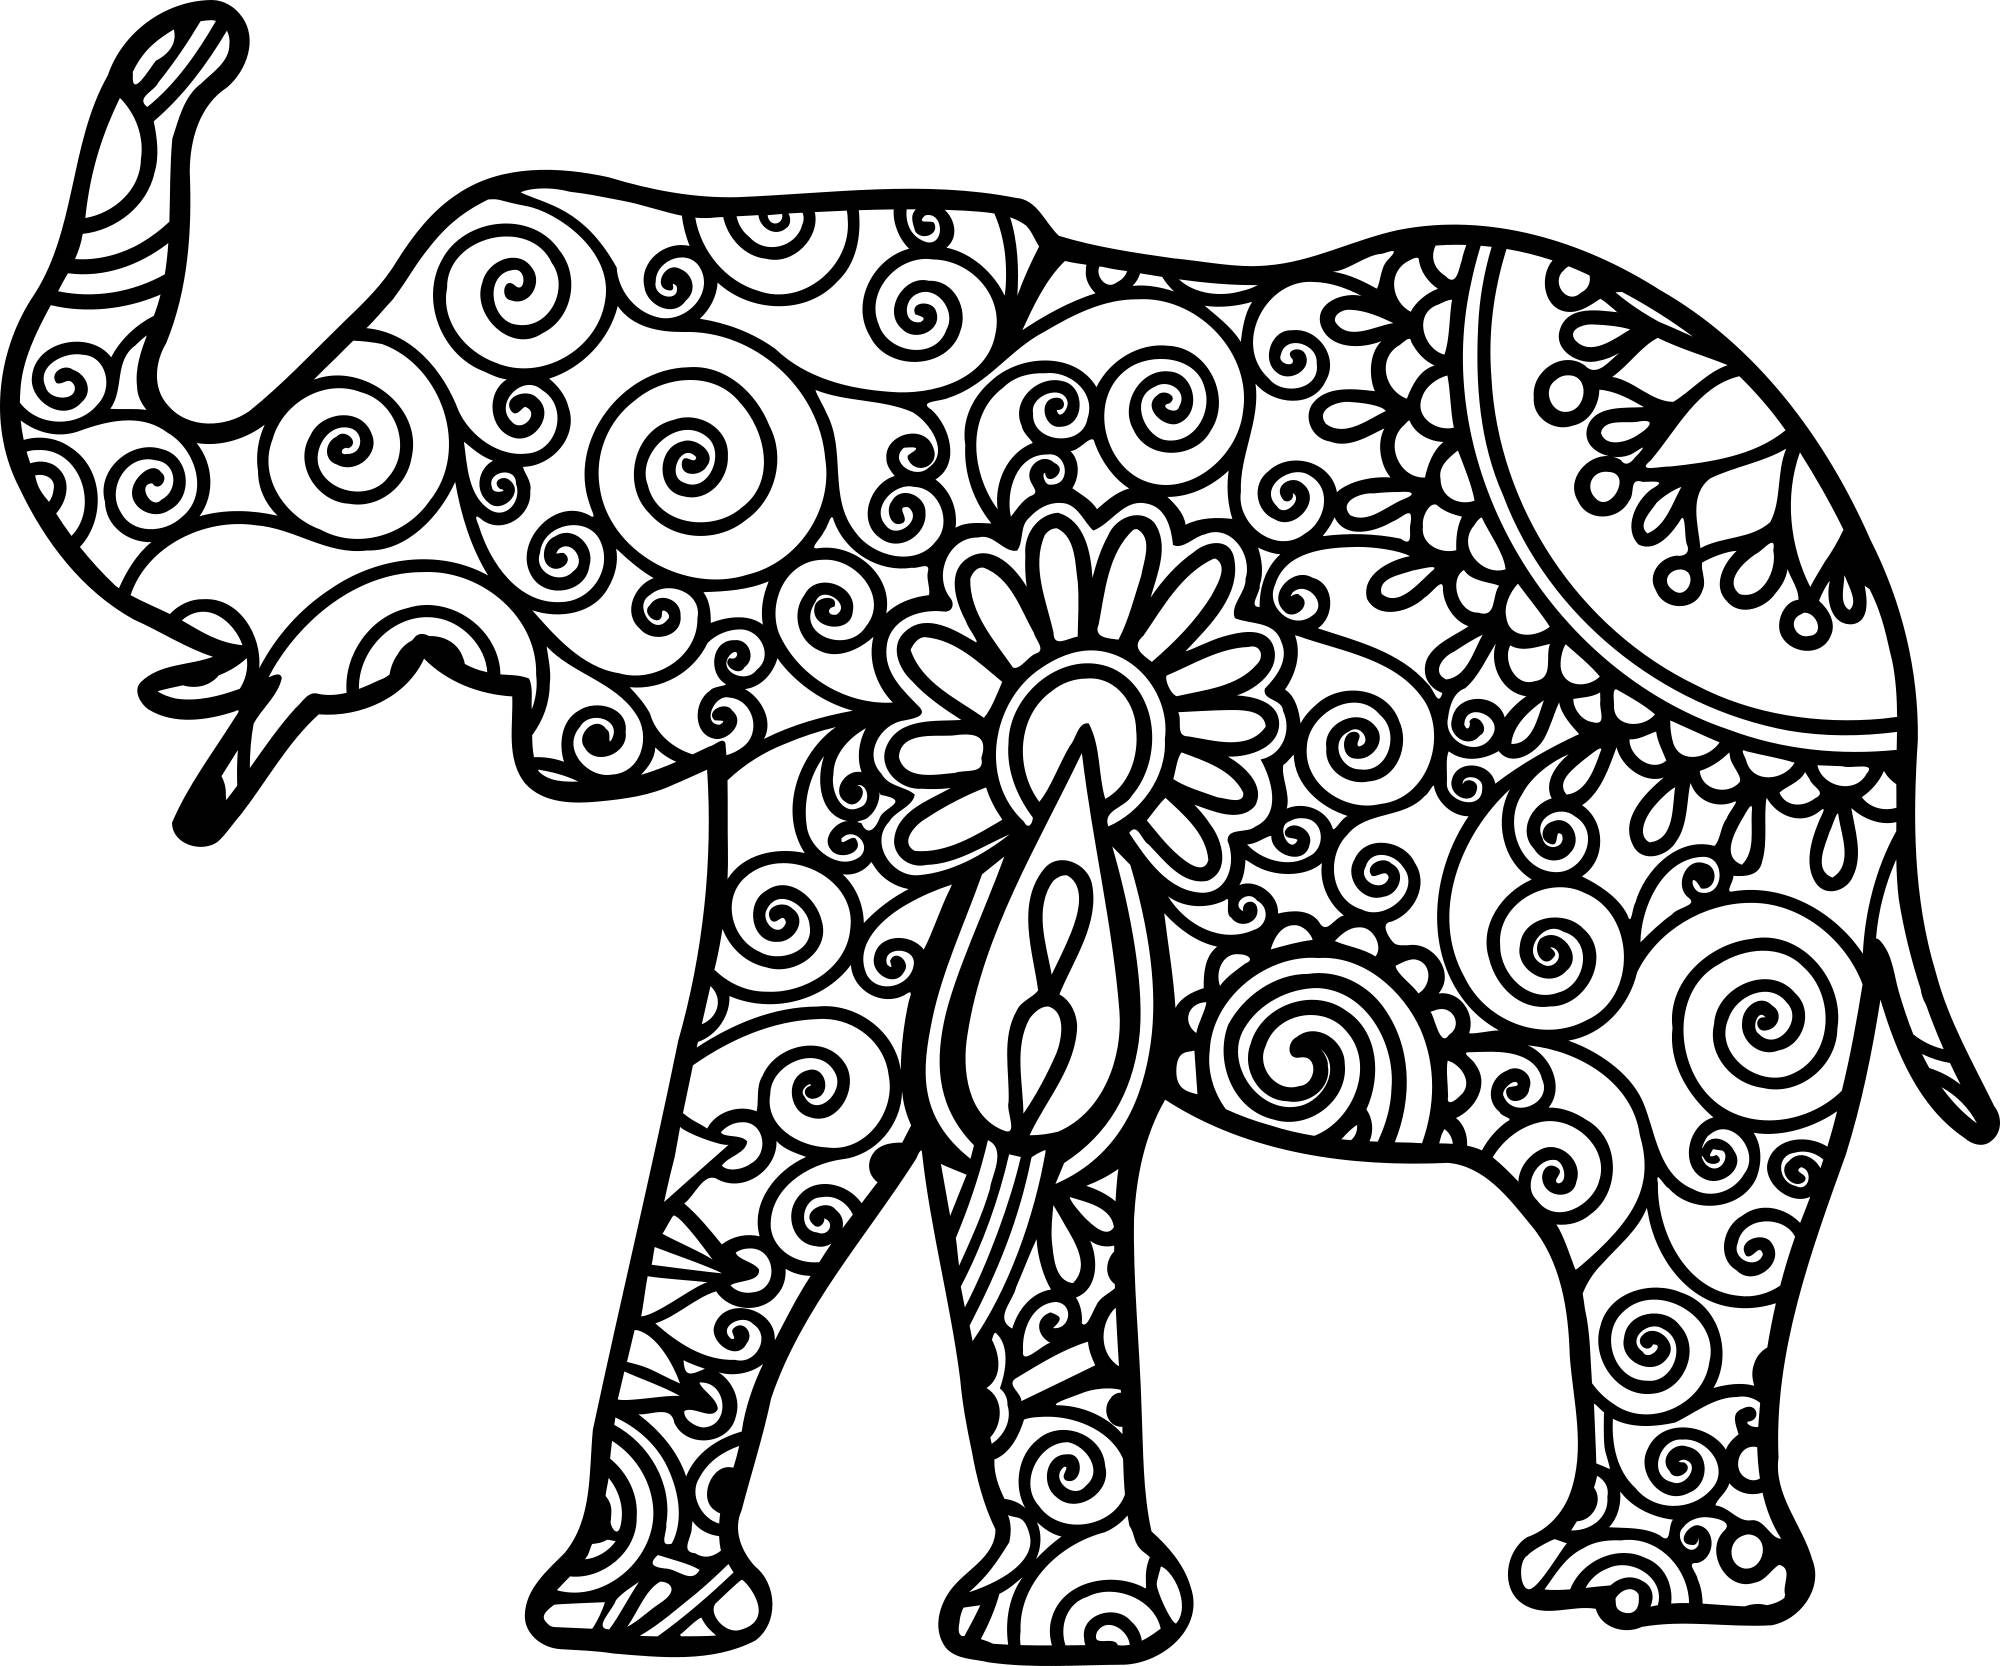 Download Mandala Elephant SVG cuttable file from LeighsSVGs on Etsy Studio